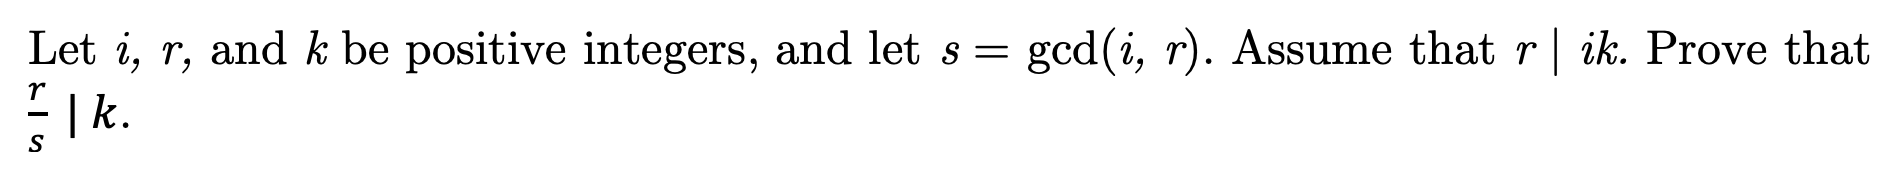 Let i, r, and k be positive integers, and let s
gcd(i, r). Assume that r | ik. Prove that
| k.
